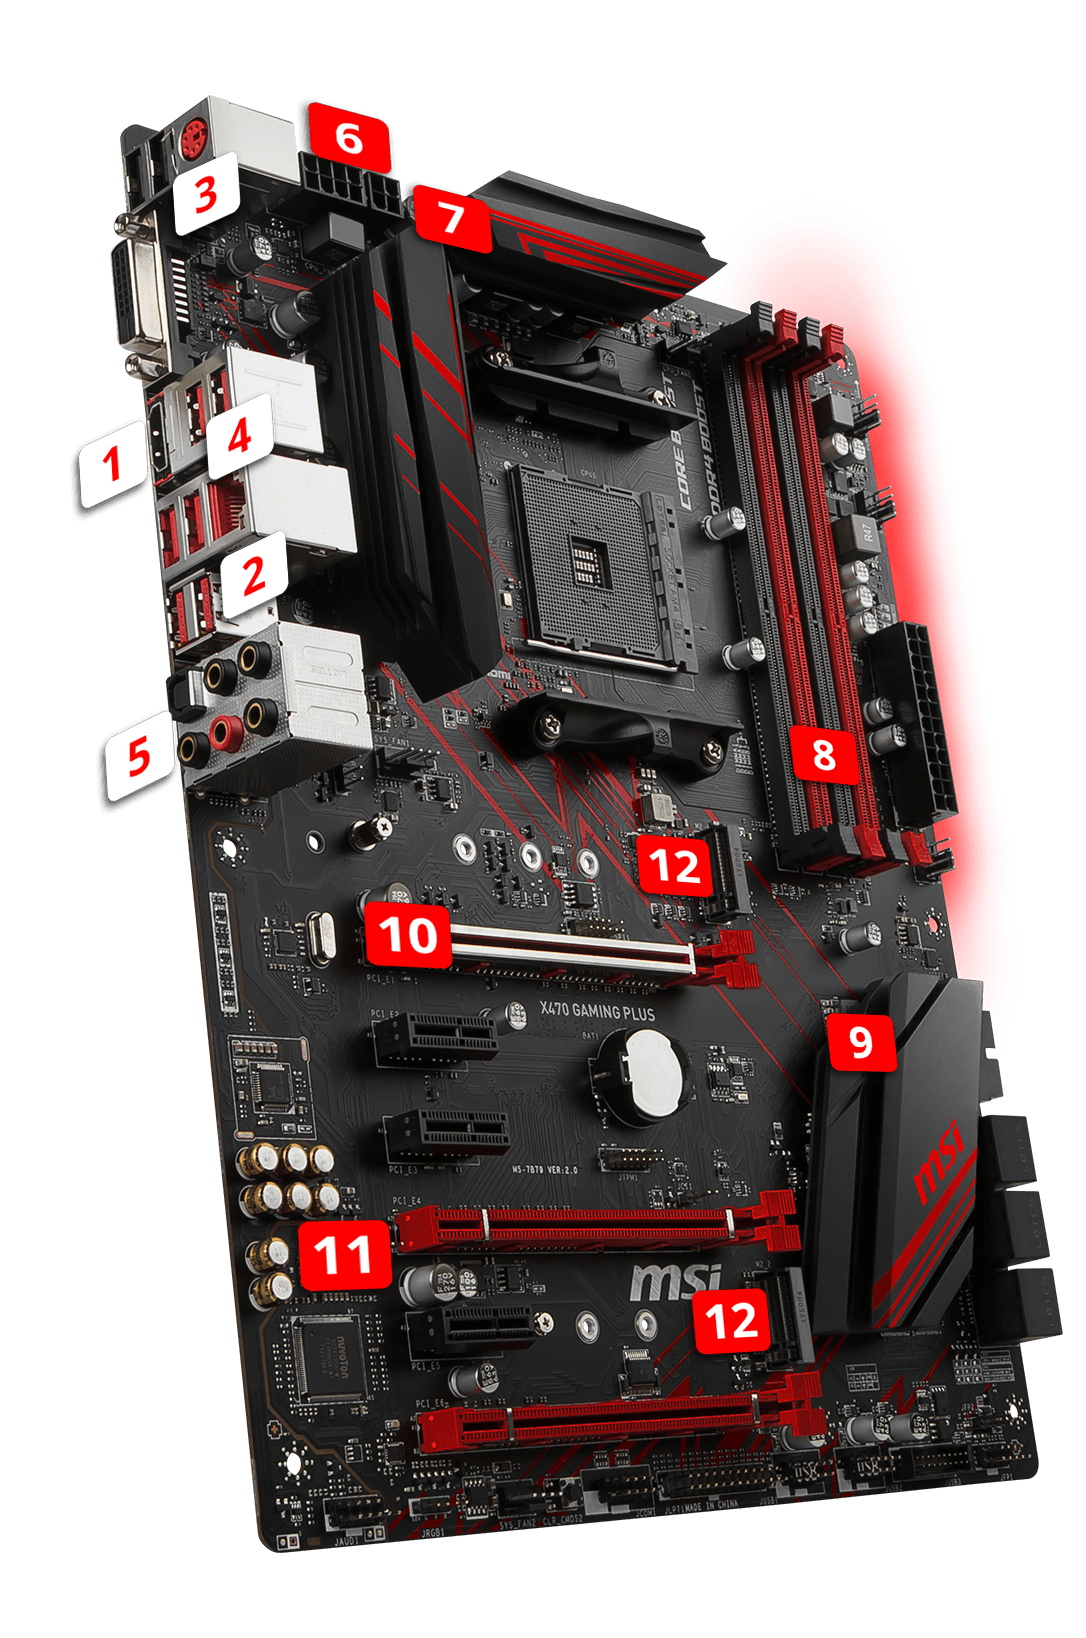 MSI X470 GAMING PLUS overview